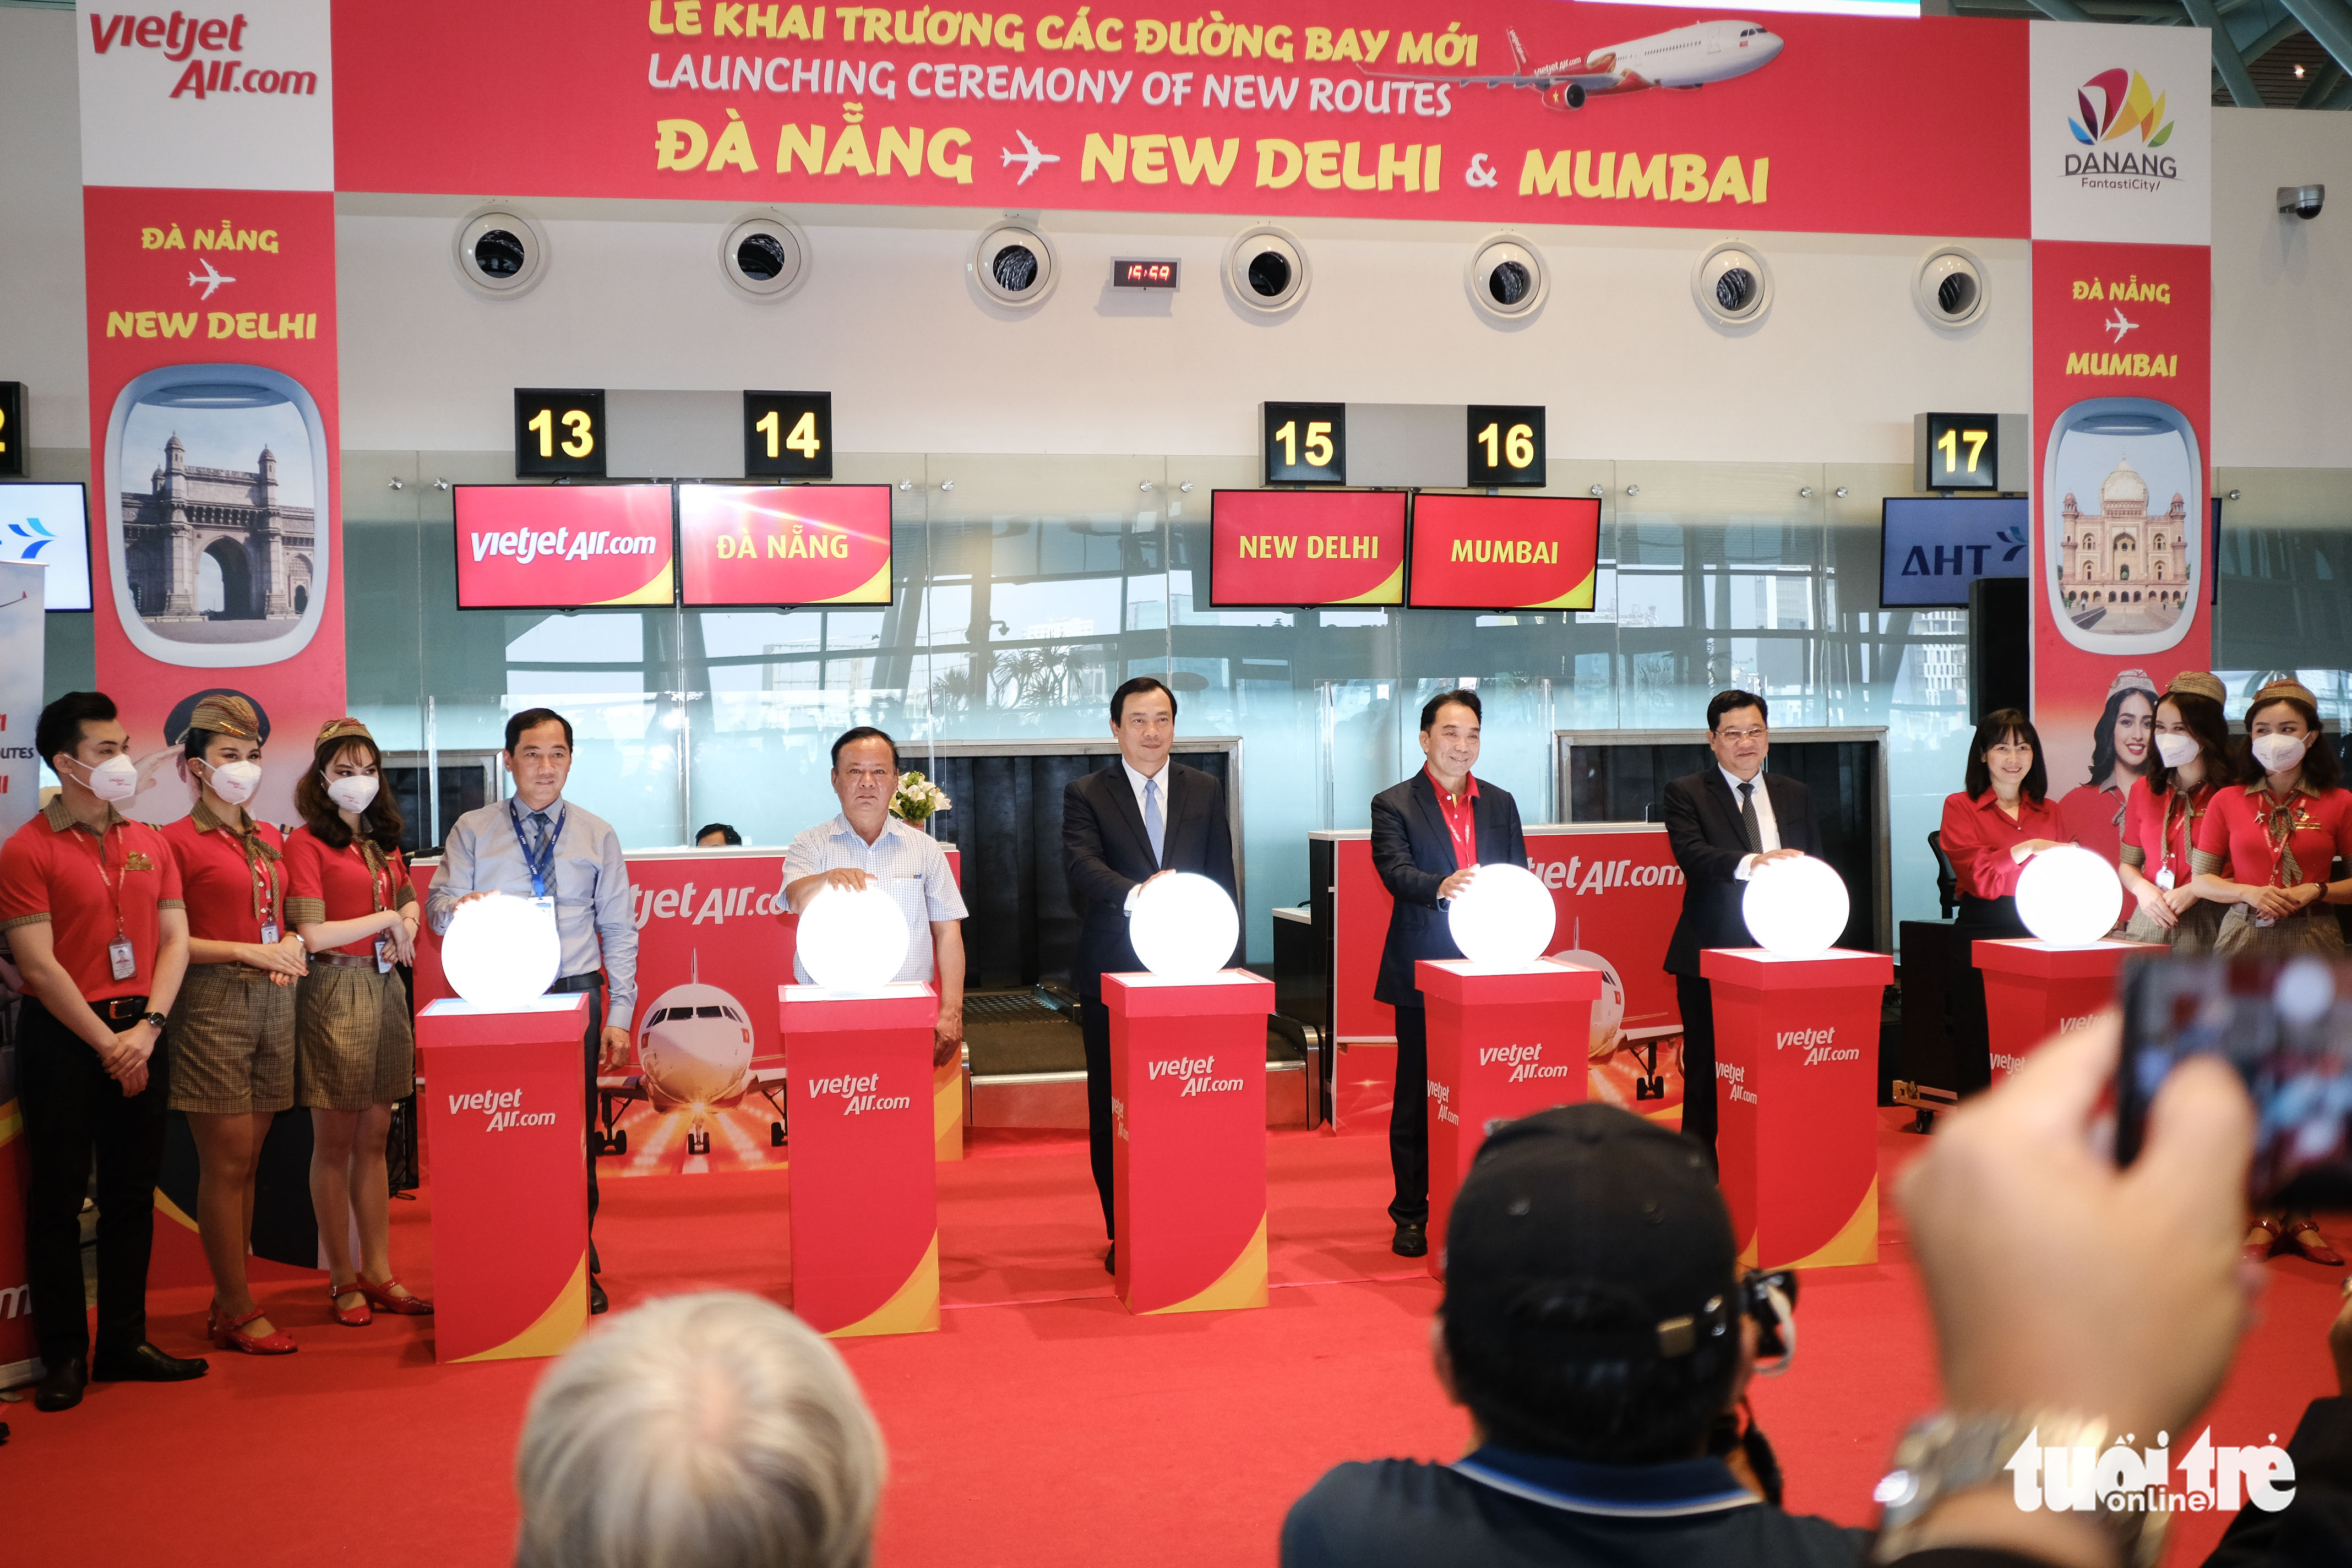 Delegates launch two new flight routes linking the central Vietnamese city of Da Nang with India’s Mumbai and New Delhi in a ceremony held at Da Nang International Airport, October 18, 2022. Photo: Tan Luc / Tuoi Tre